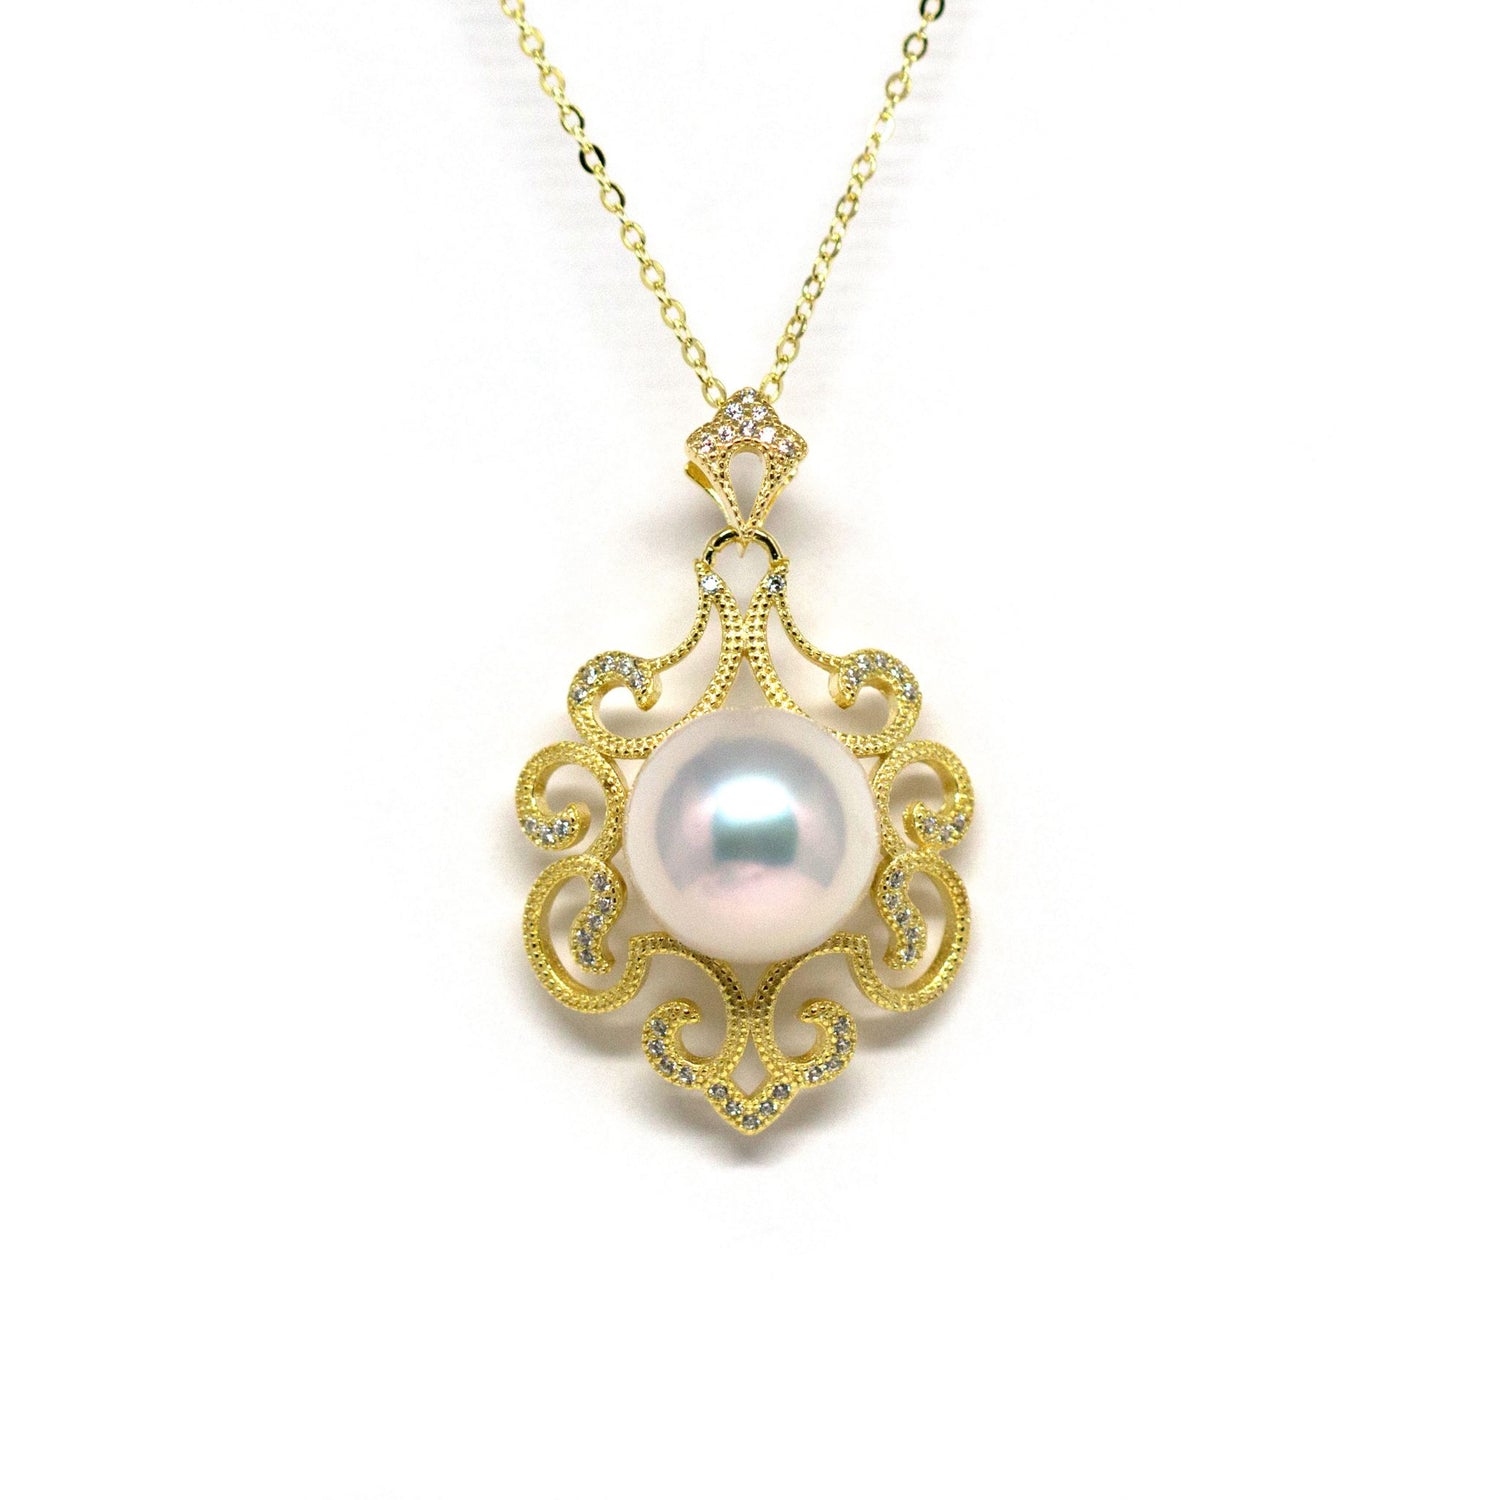 Retro Queen Edison Pearl Necklace - Timeless Pearl